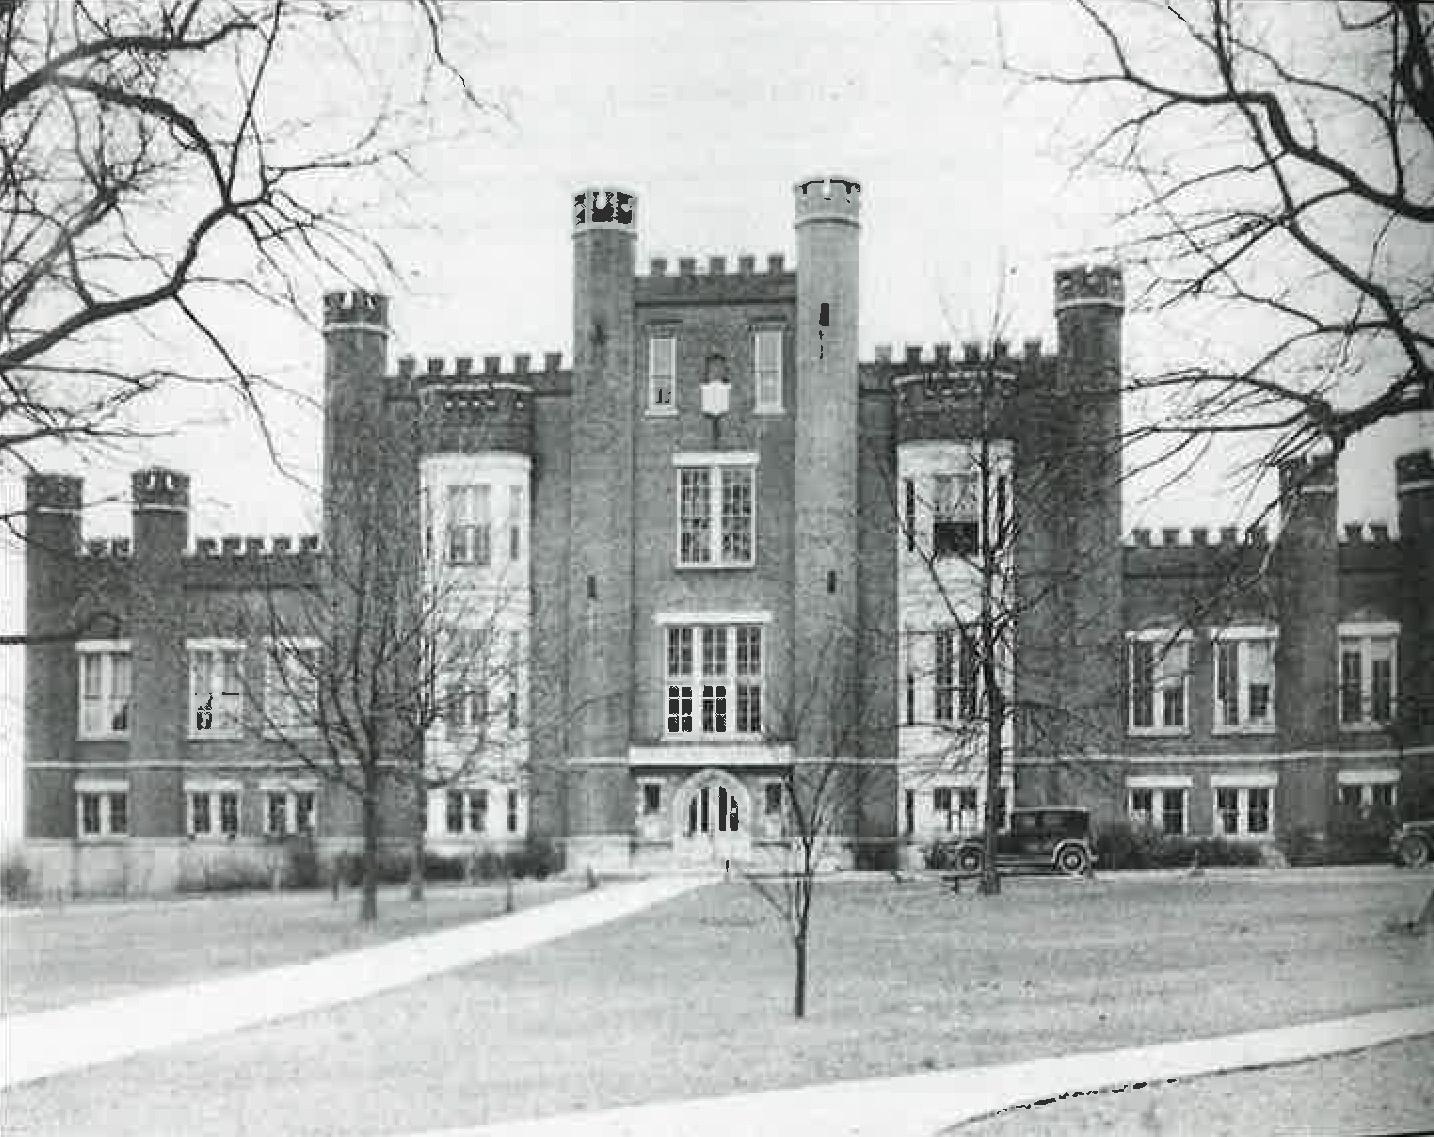 The Castle Building served campus from 1850 until it collapsed in 1946.